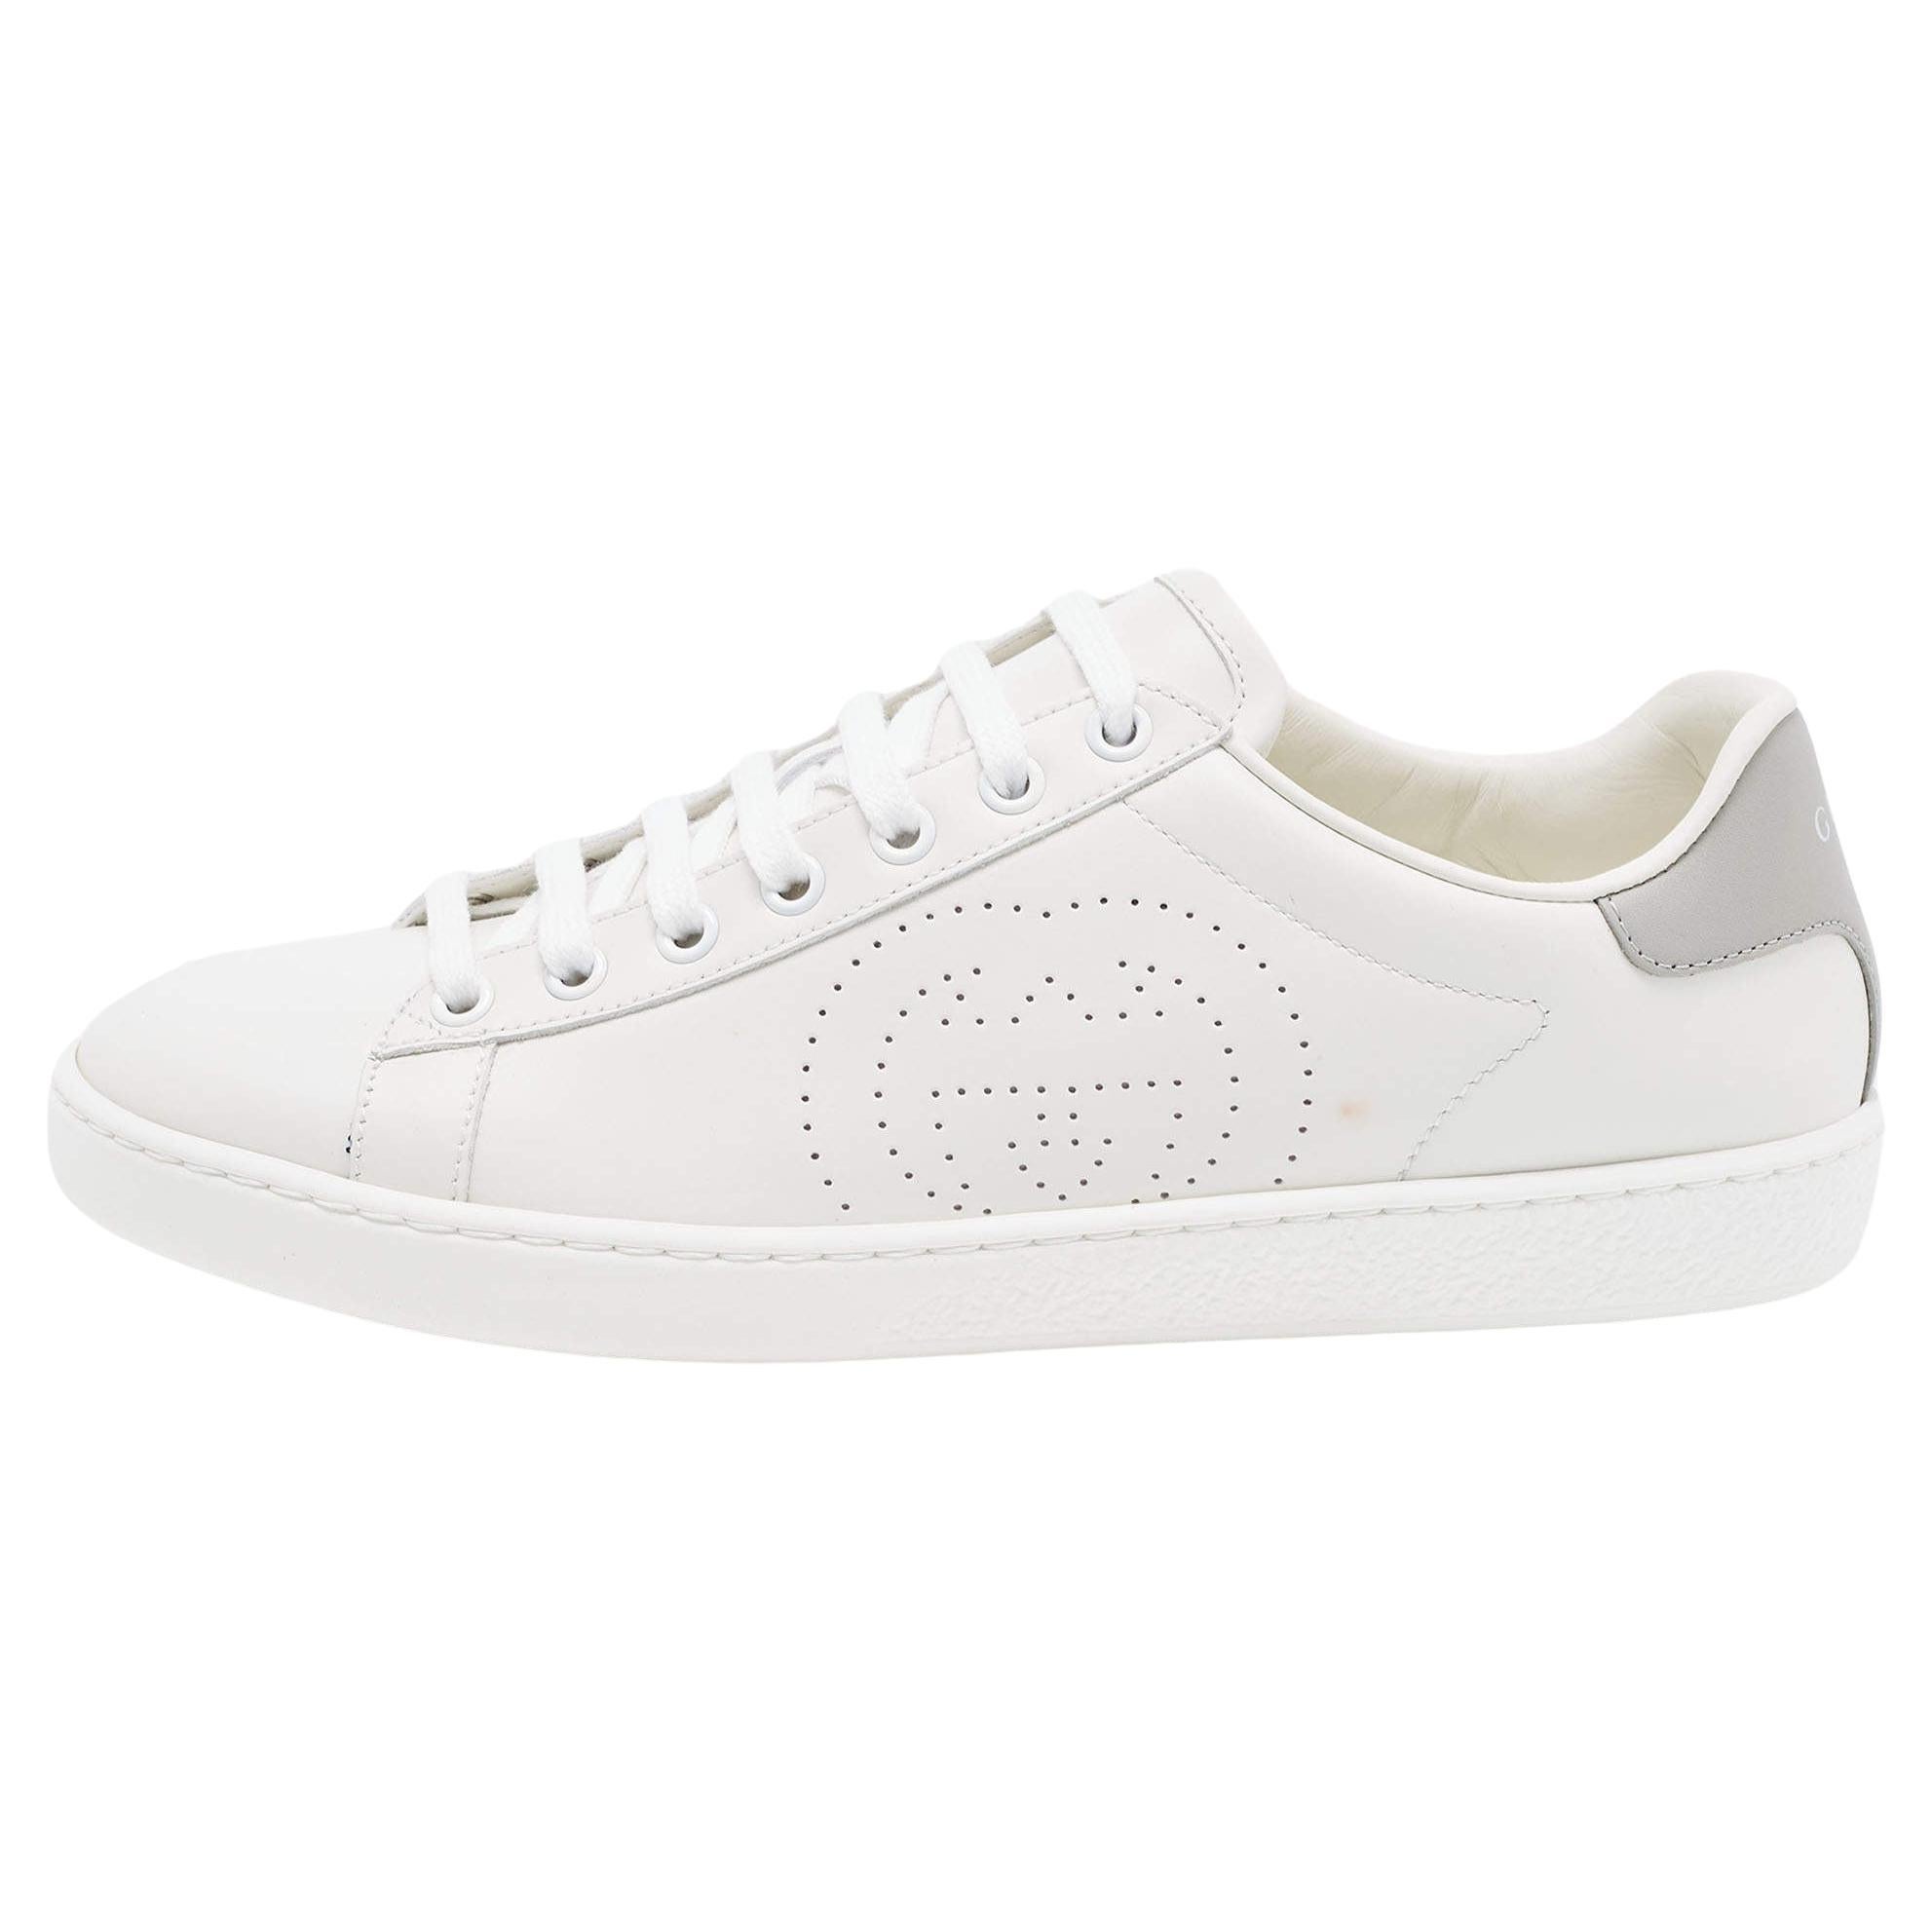 Gucci White Perforated Interlocking G Leather Ace Low Top Sneakers Size 38